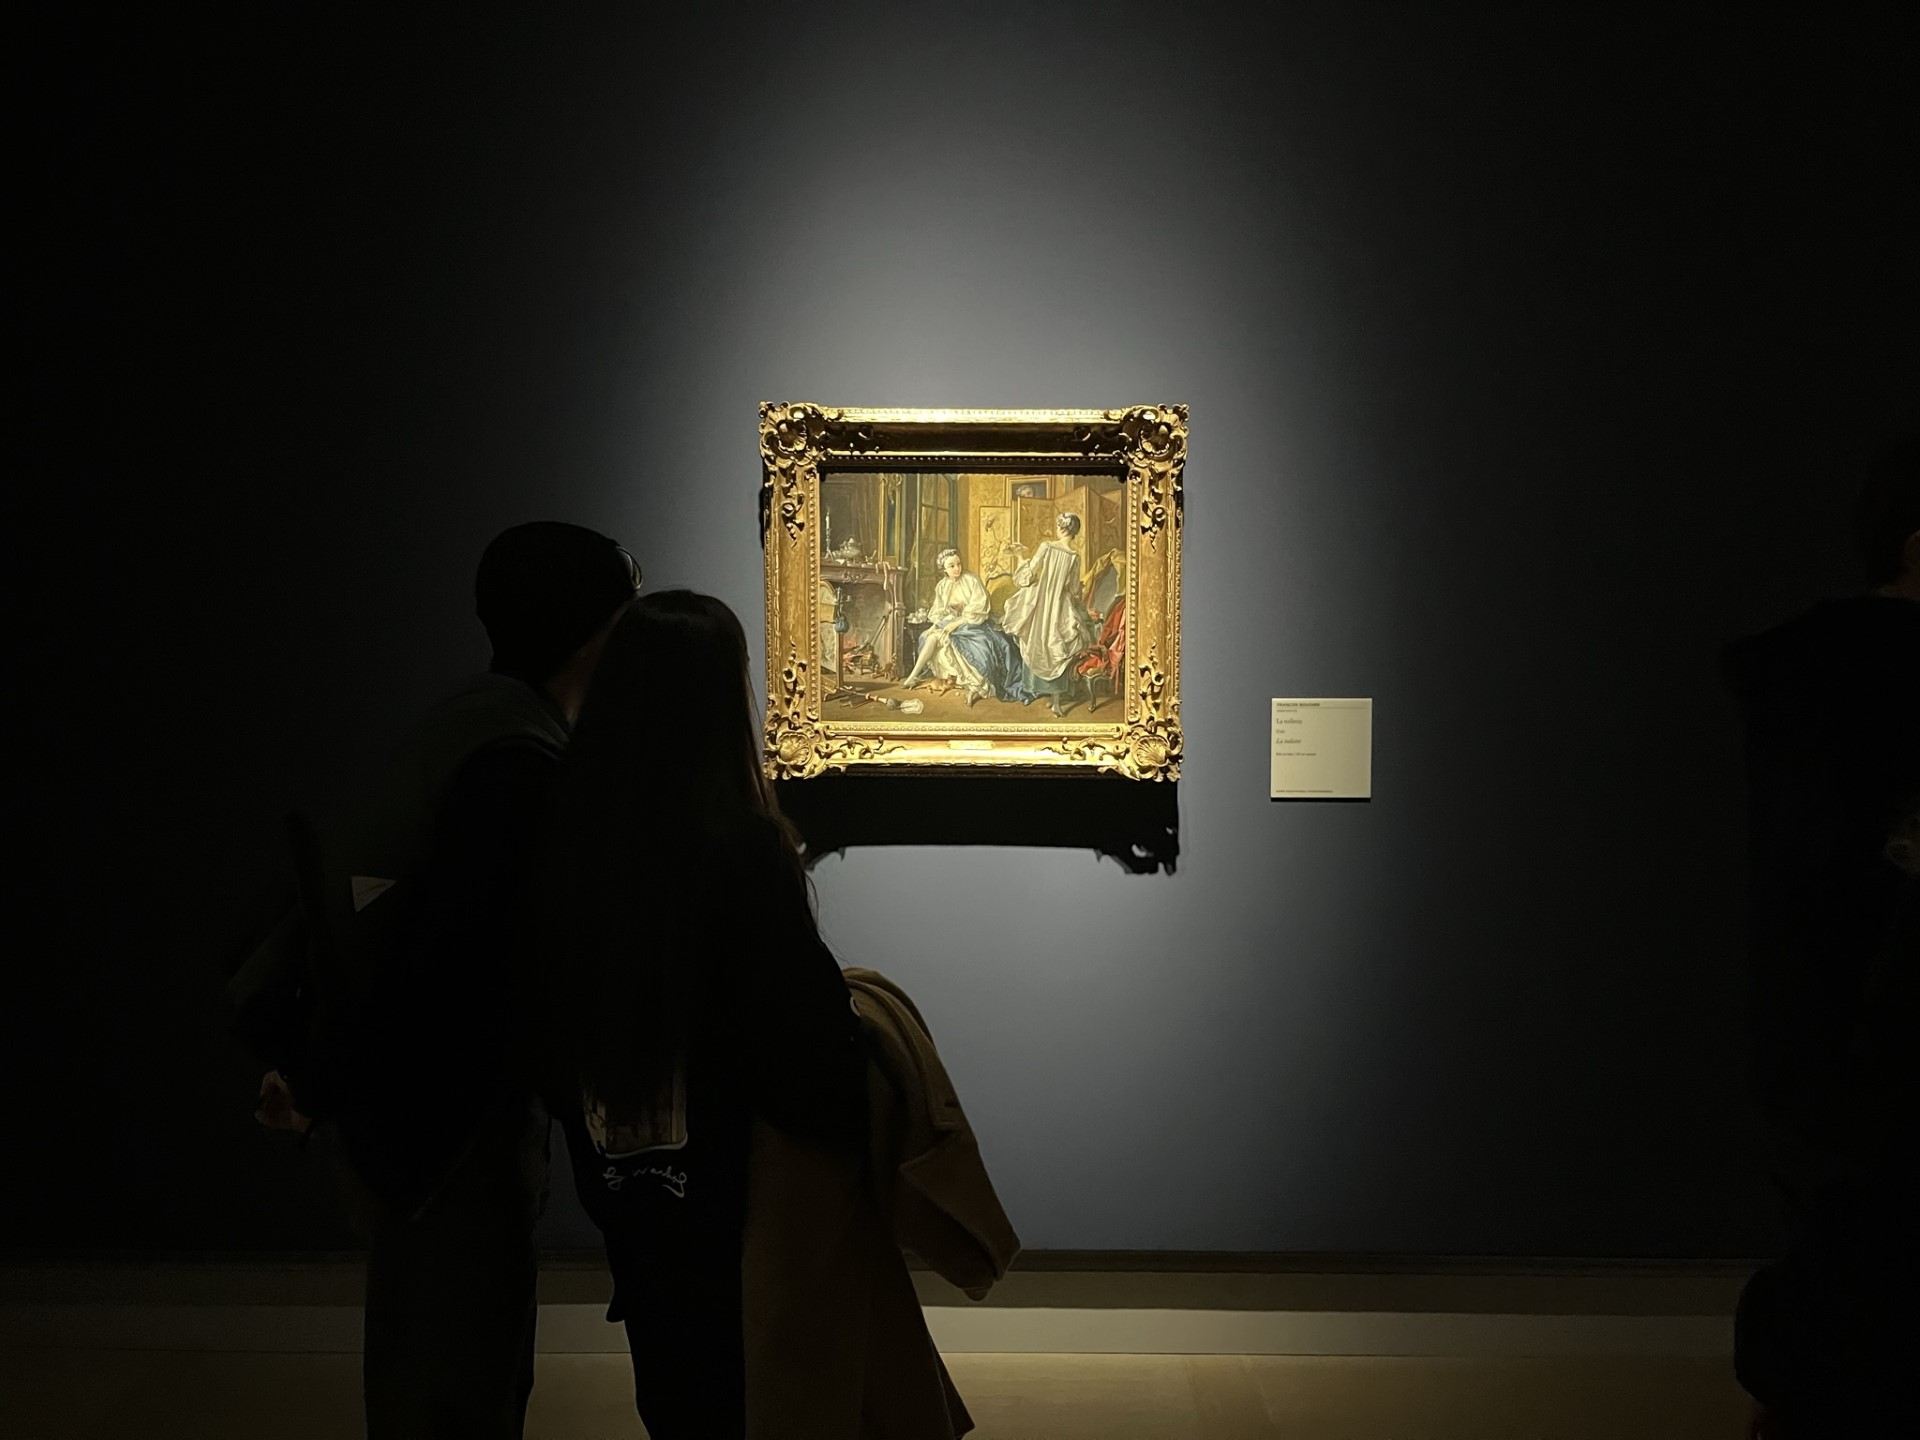 Risks in the Art Market: Common Risks and How to Mitigate Them